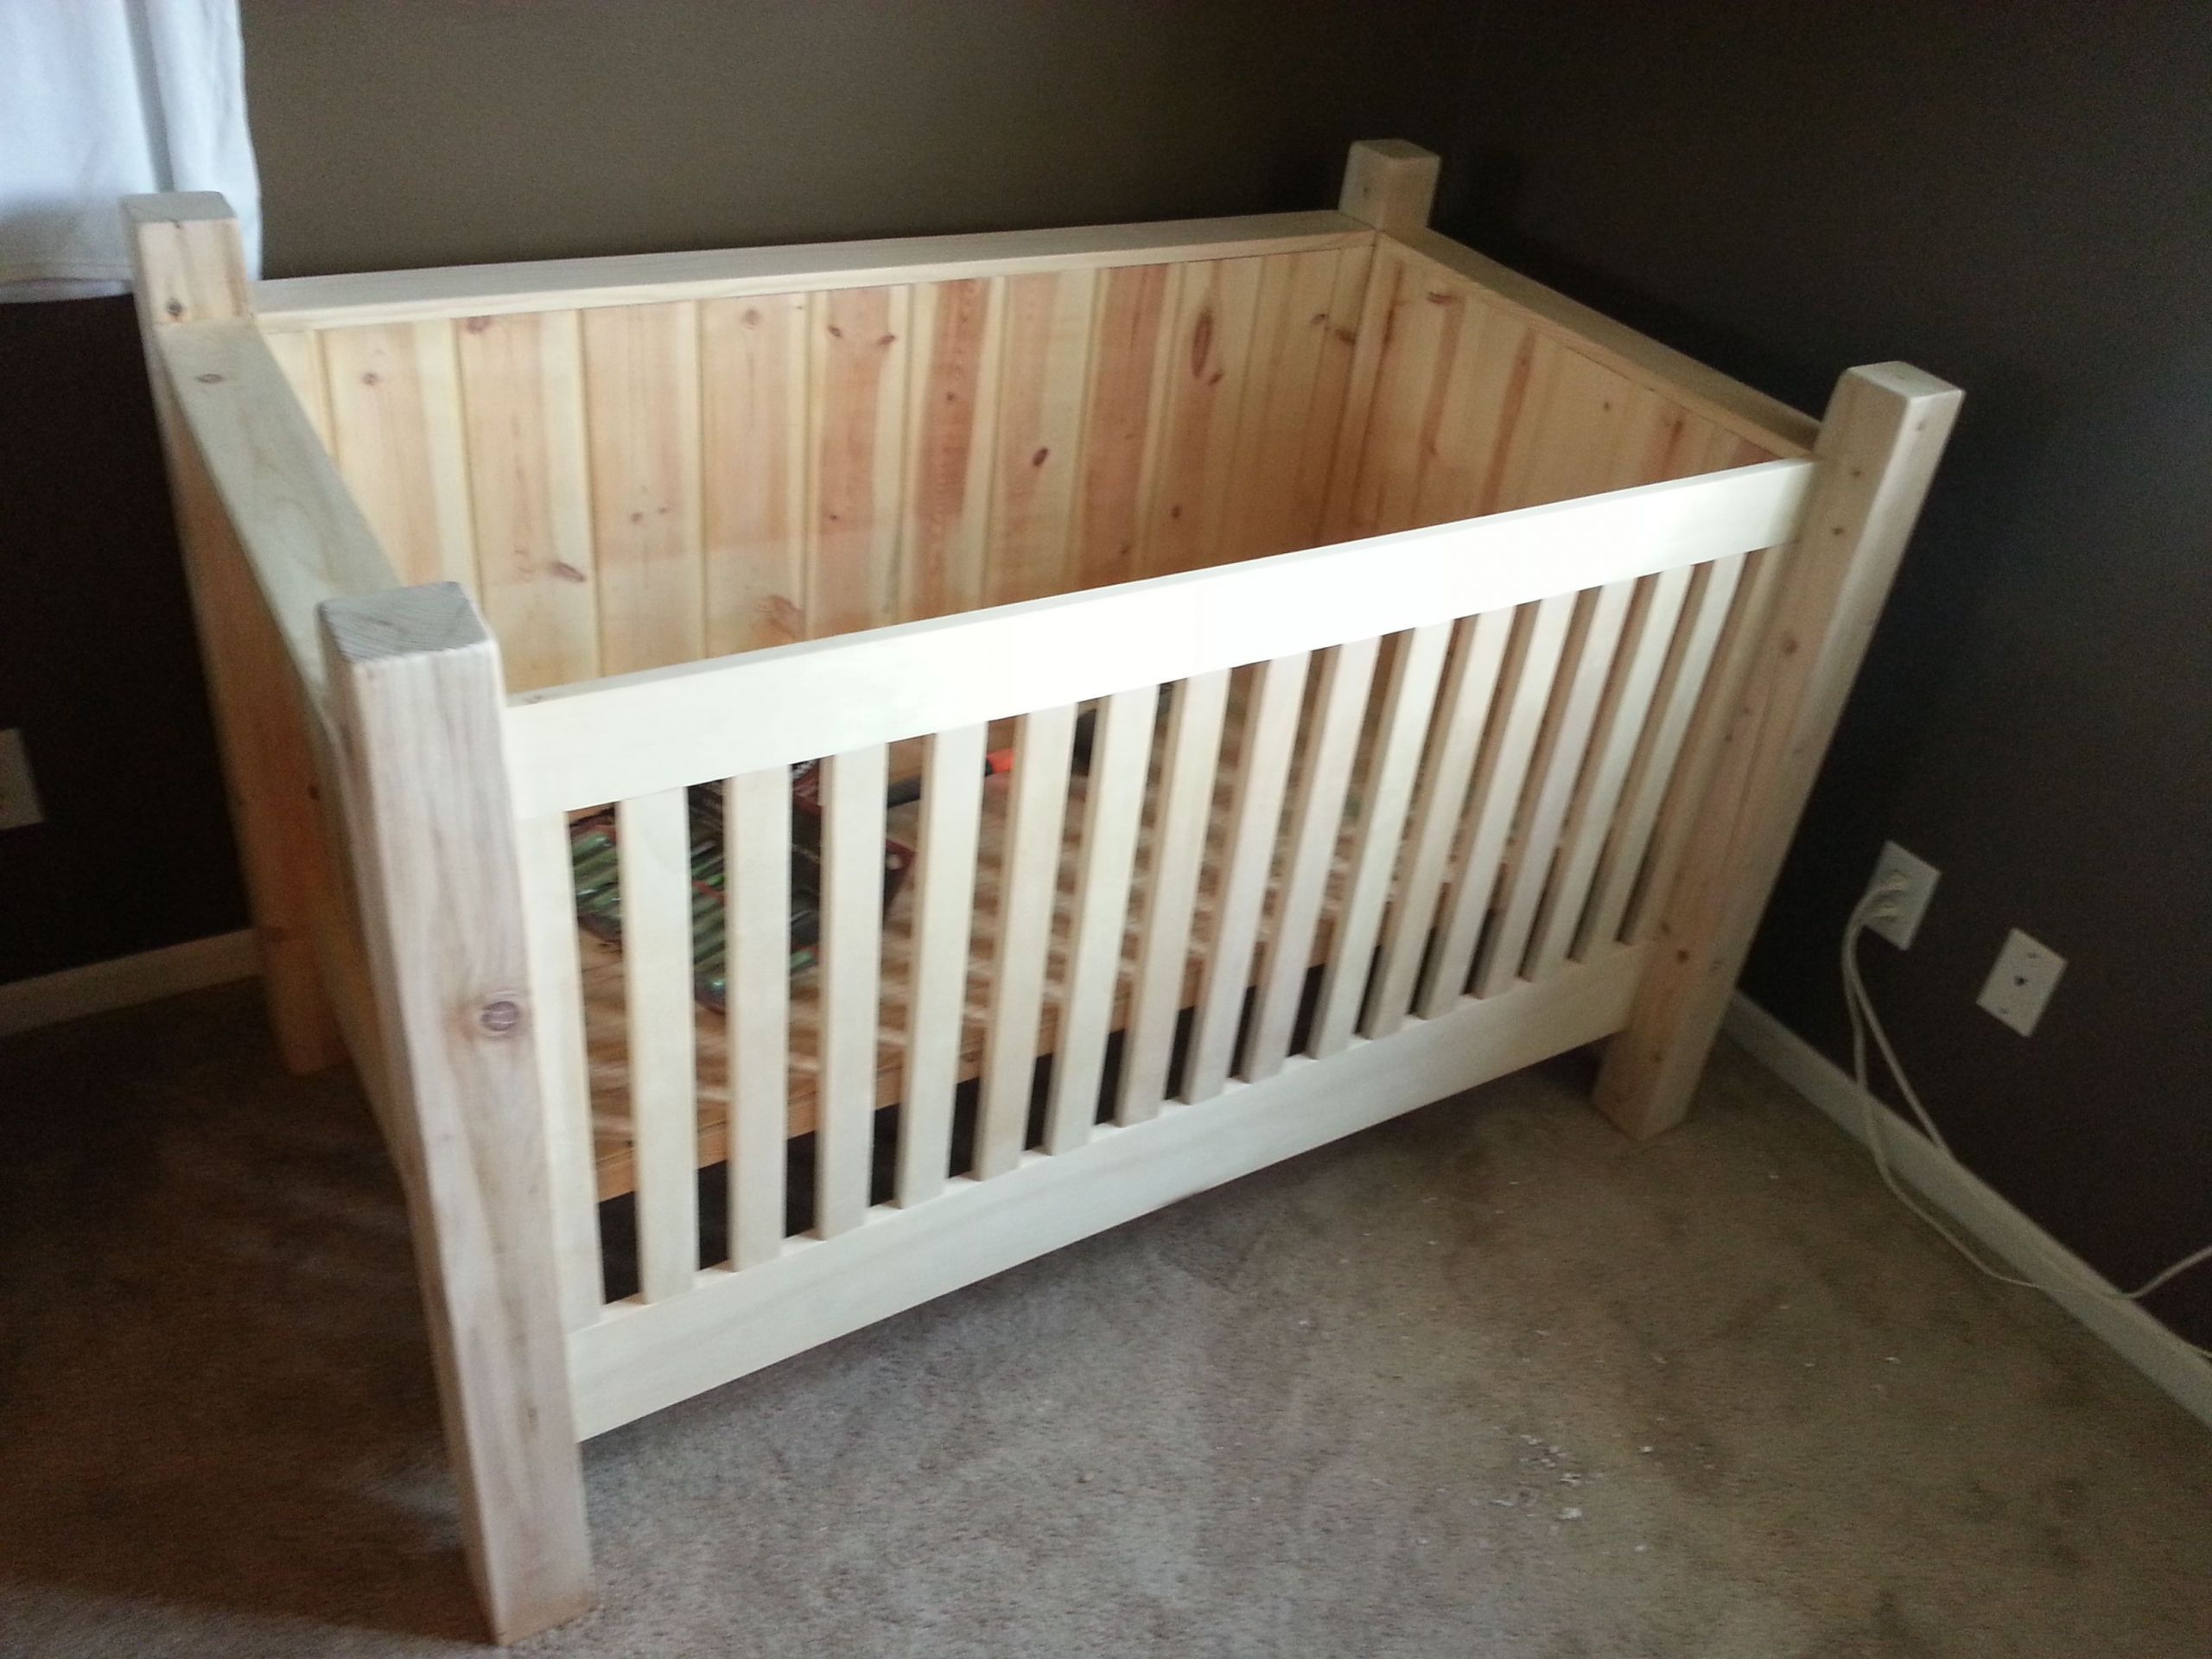 Diy Baby Crib Ideas
 DIY Wood Crib This Is Another Option If Doing All Tree